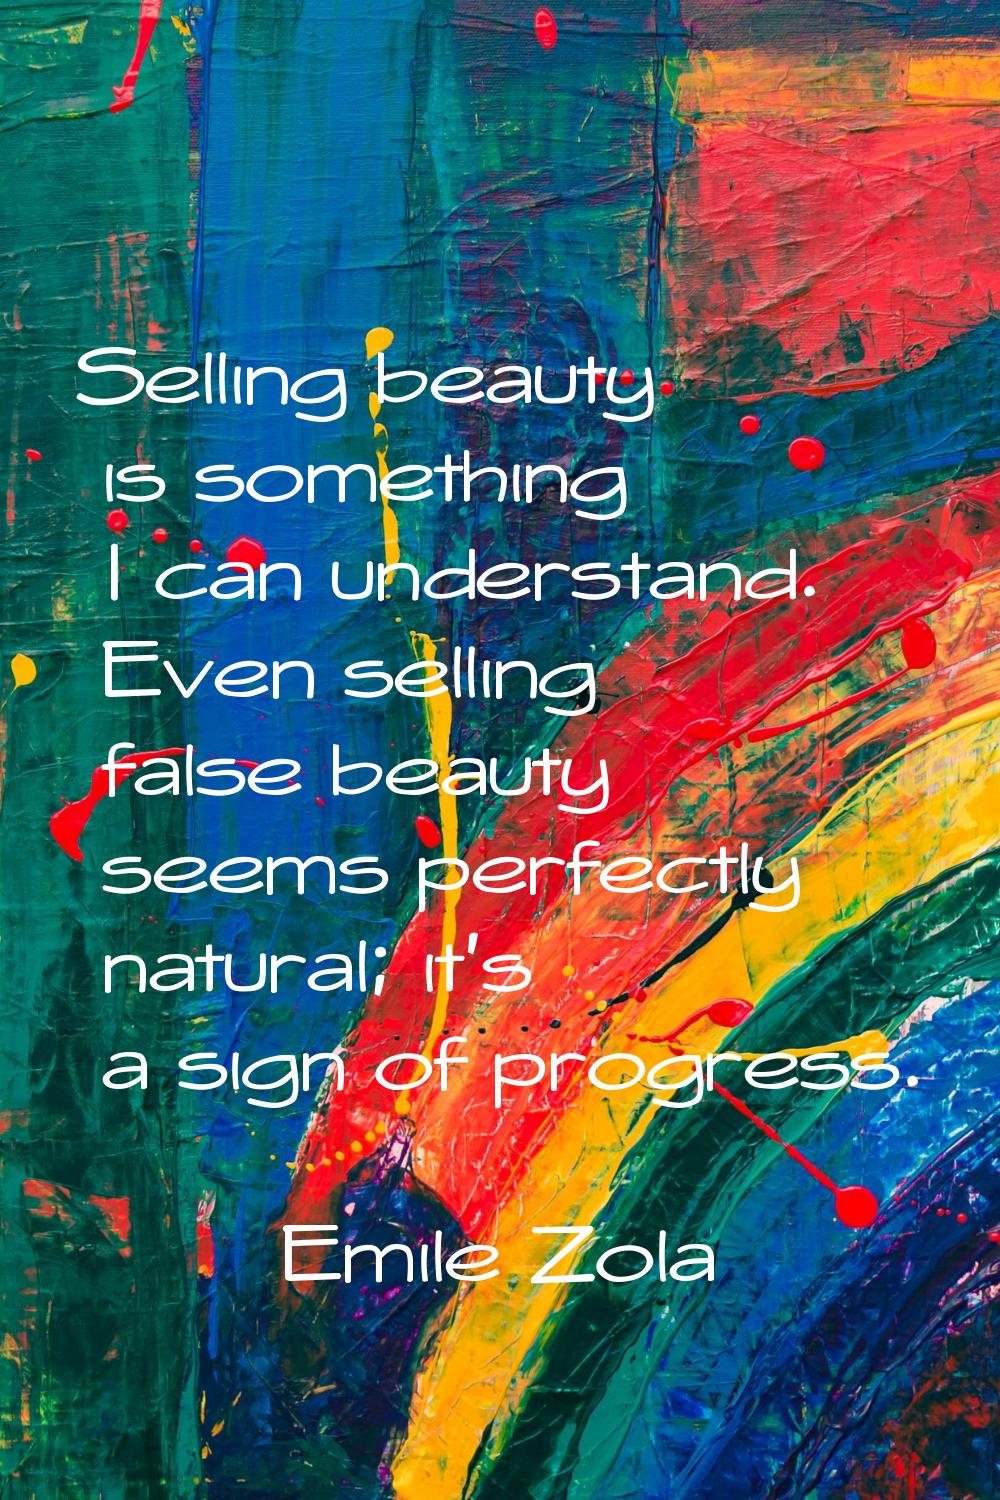 Selling beauty is something I can understand. Even selling false beauty seems perfectly natural; it